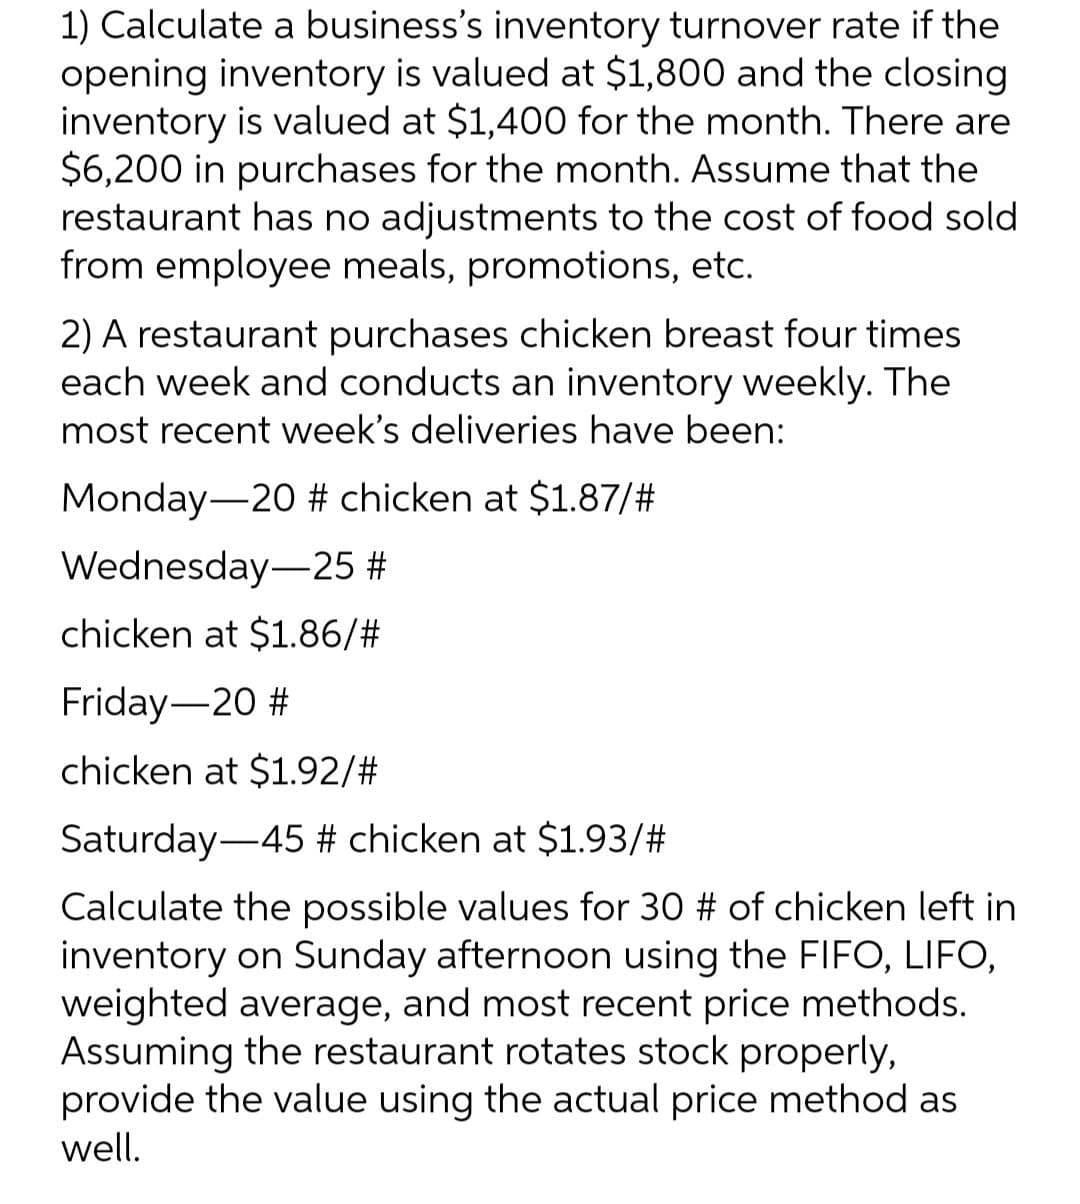 1) Calculate a business's inventory turnover rate if the
opening inventory is valued at $1,800 and the closing
inventory is valued at $1,400 for the month. There are
$6,200 in purchases for the month. Assume that the
restaurant has no adjustments to the cost of food sold
from employee meals, promotions, etc.
2) A restaurant purchases chicken breast four times
each week and conducts an inventory weekly. The
most recent week's deliveries have been:
Monday-20 # chicken at $1.87/#
Wednesday
25 #
chicken at $1.86/#
Friday-20 #
chicken at $1.92/#
Saturday 45 # chicken at $1.93/#
Calculate the possible values for 30 # of chicken left in
inventory on Sunday afternoon using the FIFO, LIFO,
weighted average, and most recent price methods.
Assuming the restaurant rotates stock properly,
provide the value using the actual price method as
well.